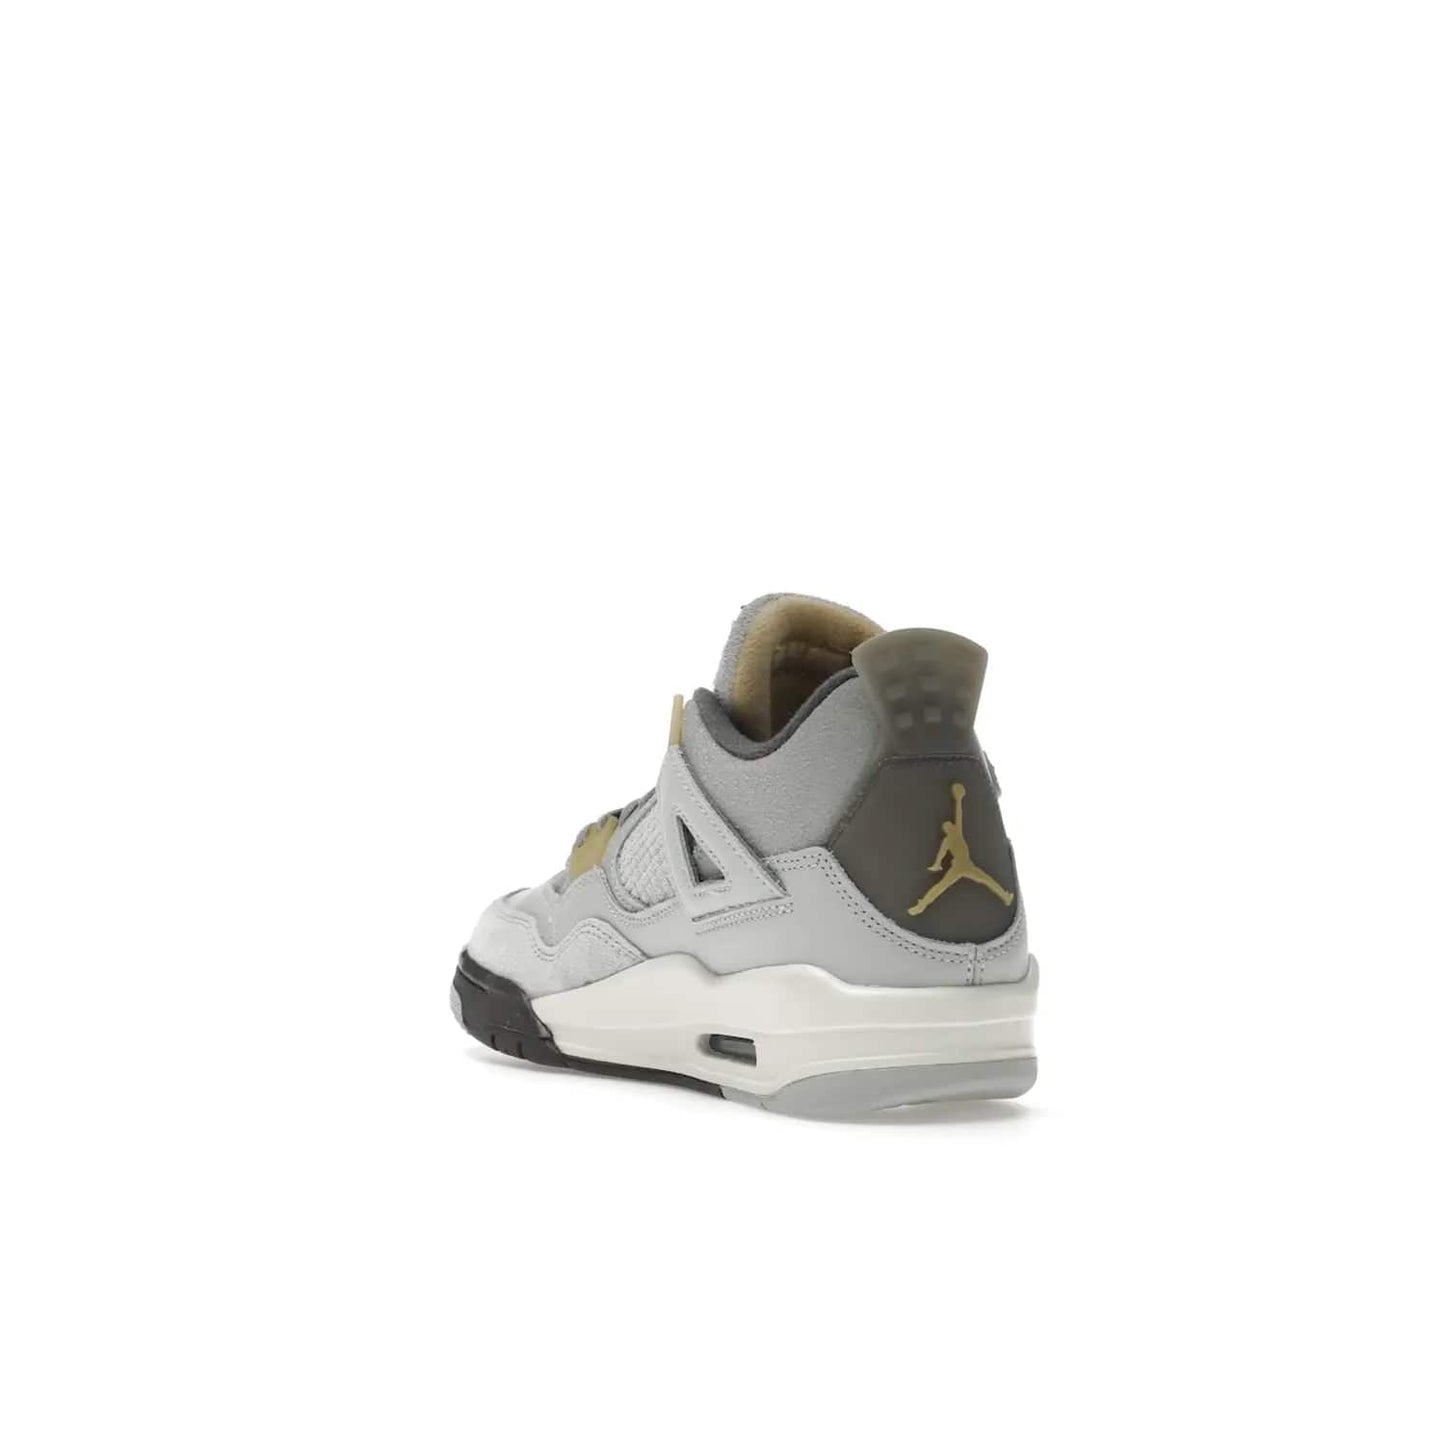 Jordan 4 Retro SE Craft Photon Dust (GS) - Image 25 - Only at www.BallersClubKickz.com - Shop the Jordan 4 Retro SE Craft Photon Dust (GS), the ultimate mix of style and comfort. With photonic dust, pale vanilla, off-white, grey fog, flat pewter and sail colorway, foam midsole, and rubber outsole, don't miss this special edition Jordan 4 releasing Feb 11, 2023.